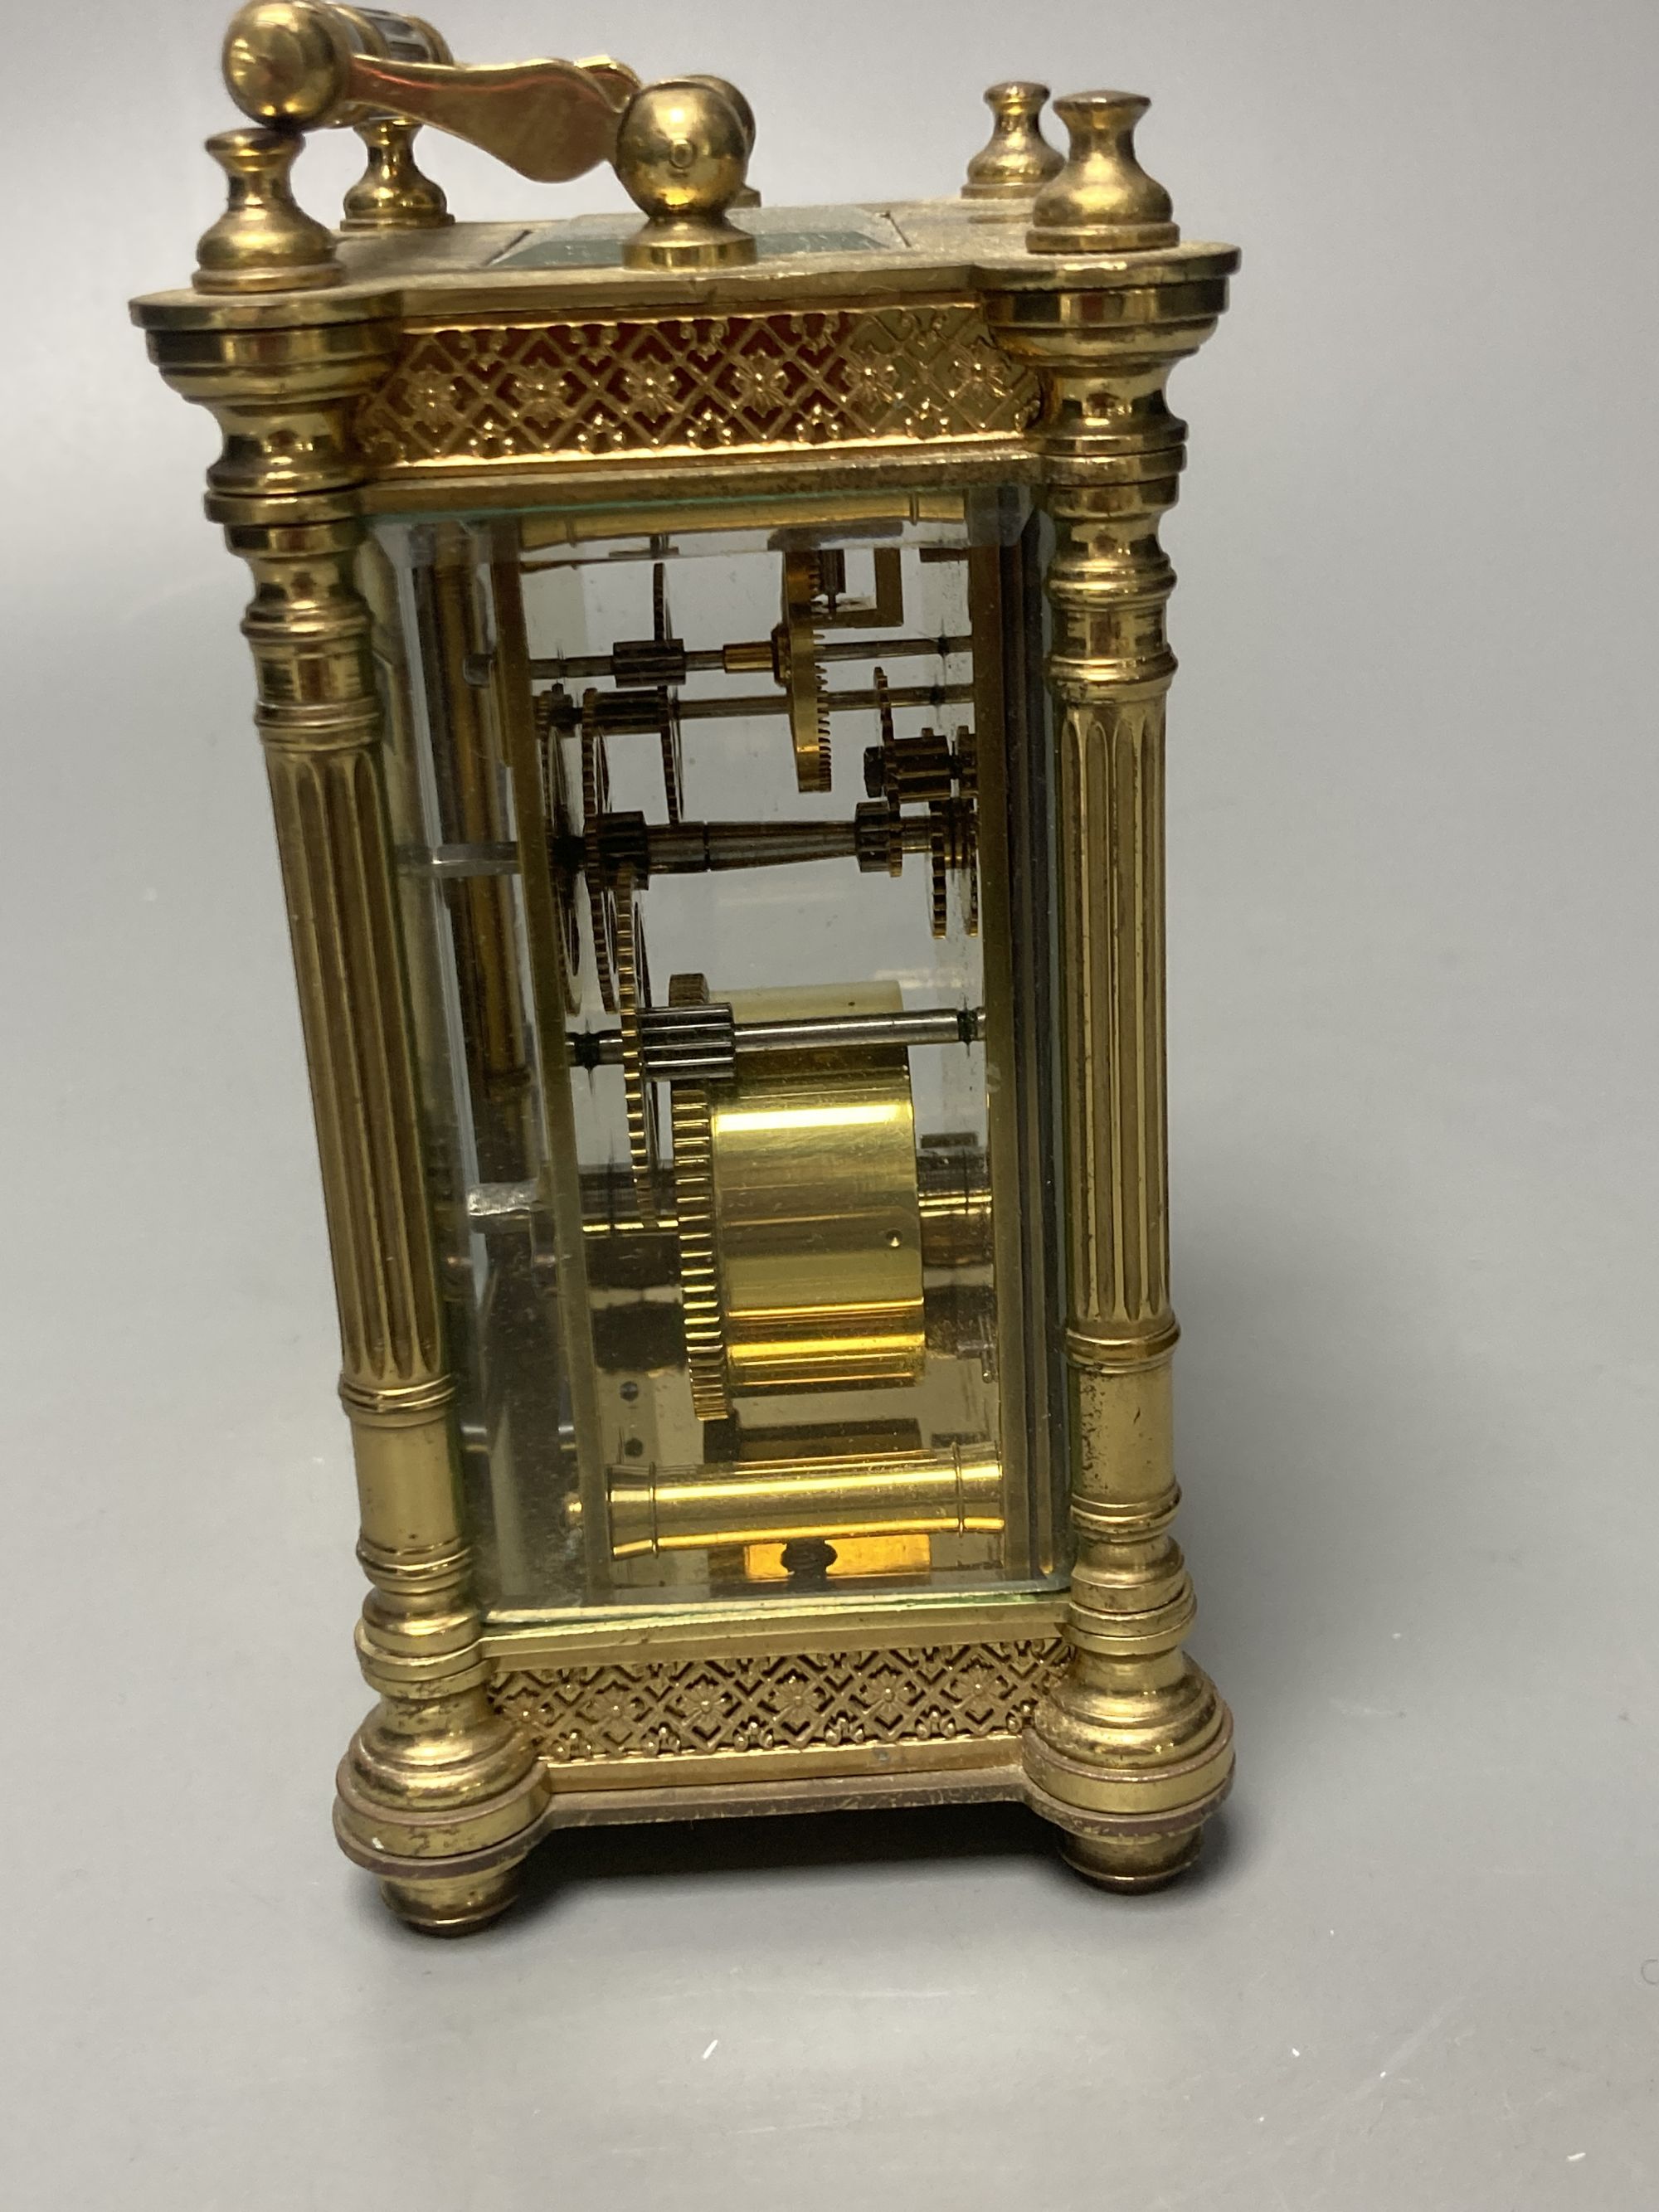 An early 20th century French ornate brass carriage timepiece, height 13cm